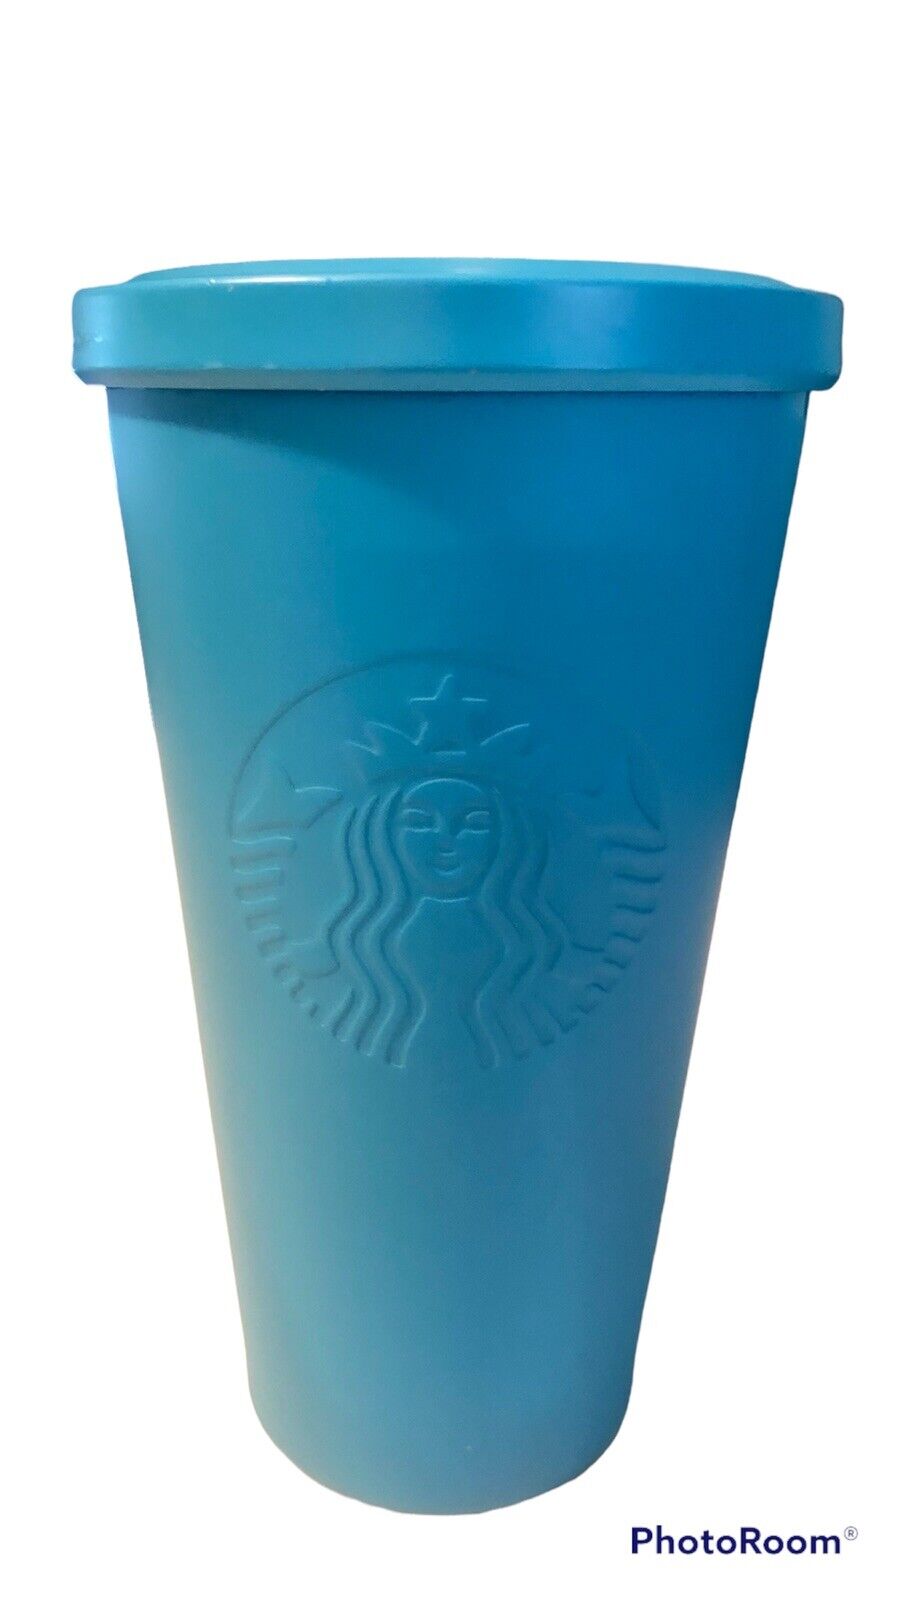 2014 Starbucks 16 oz. Stainless Steel Cold Cup Matte Teal Embossed Siren Rare